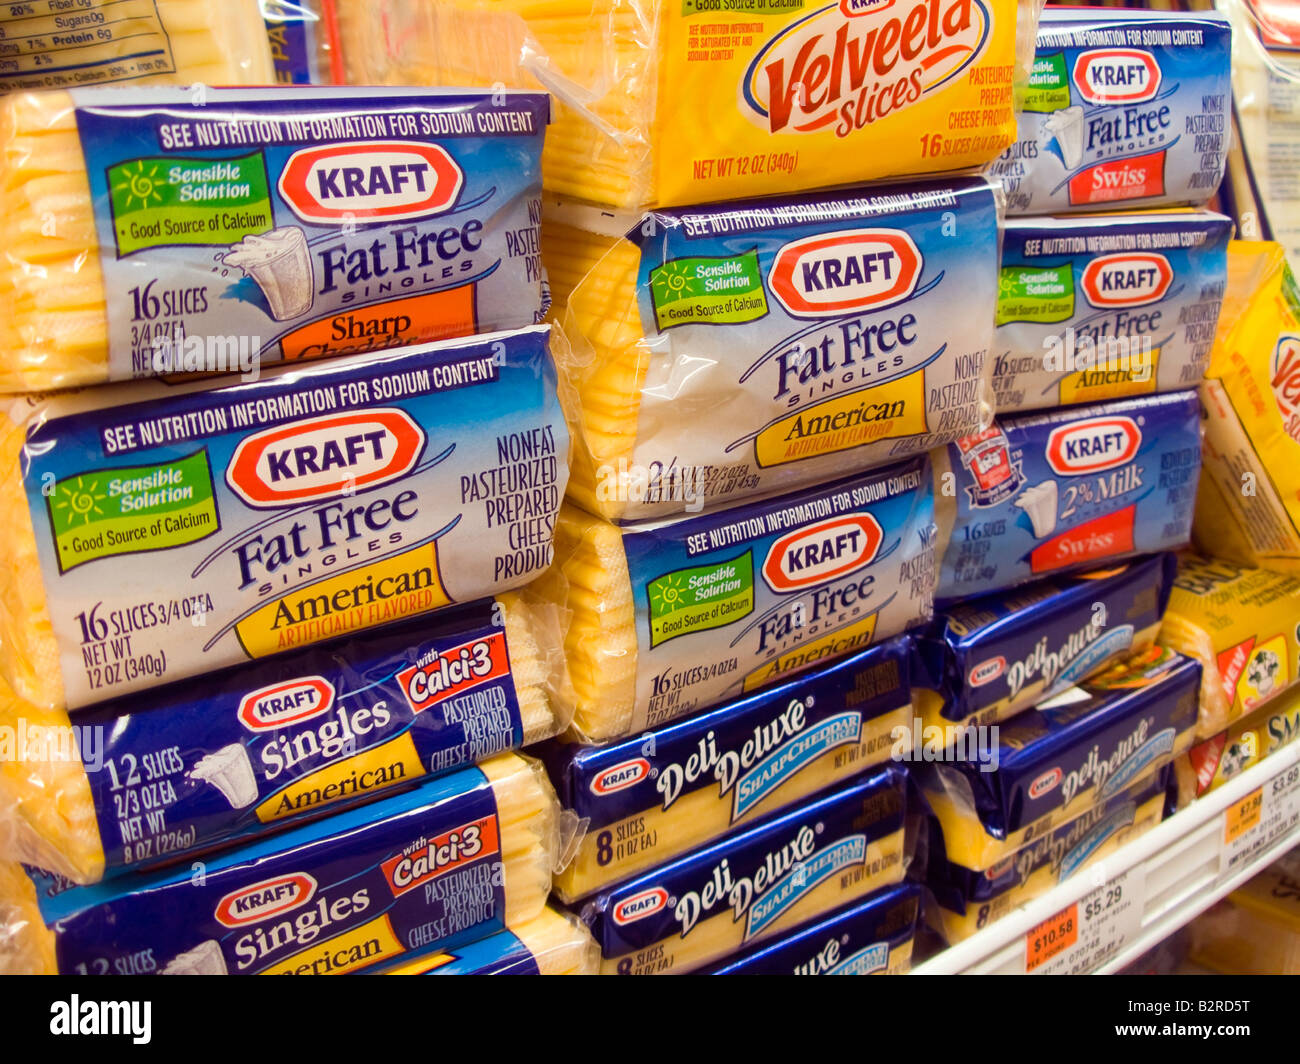 Packages of Kraft Foods cheese are seen in a supermarket refrigerator case in New York Stock Photo